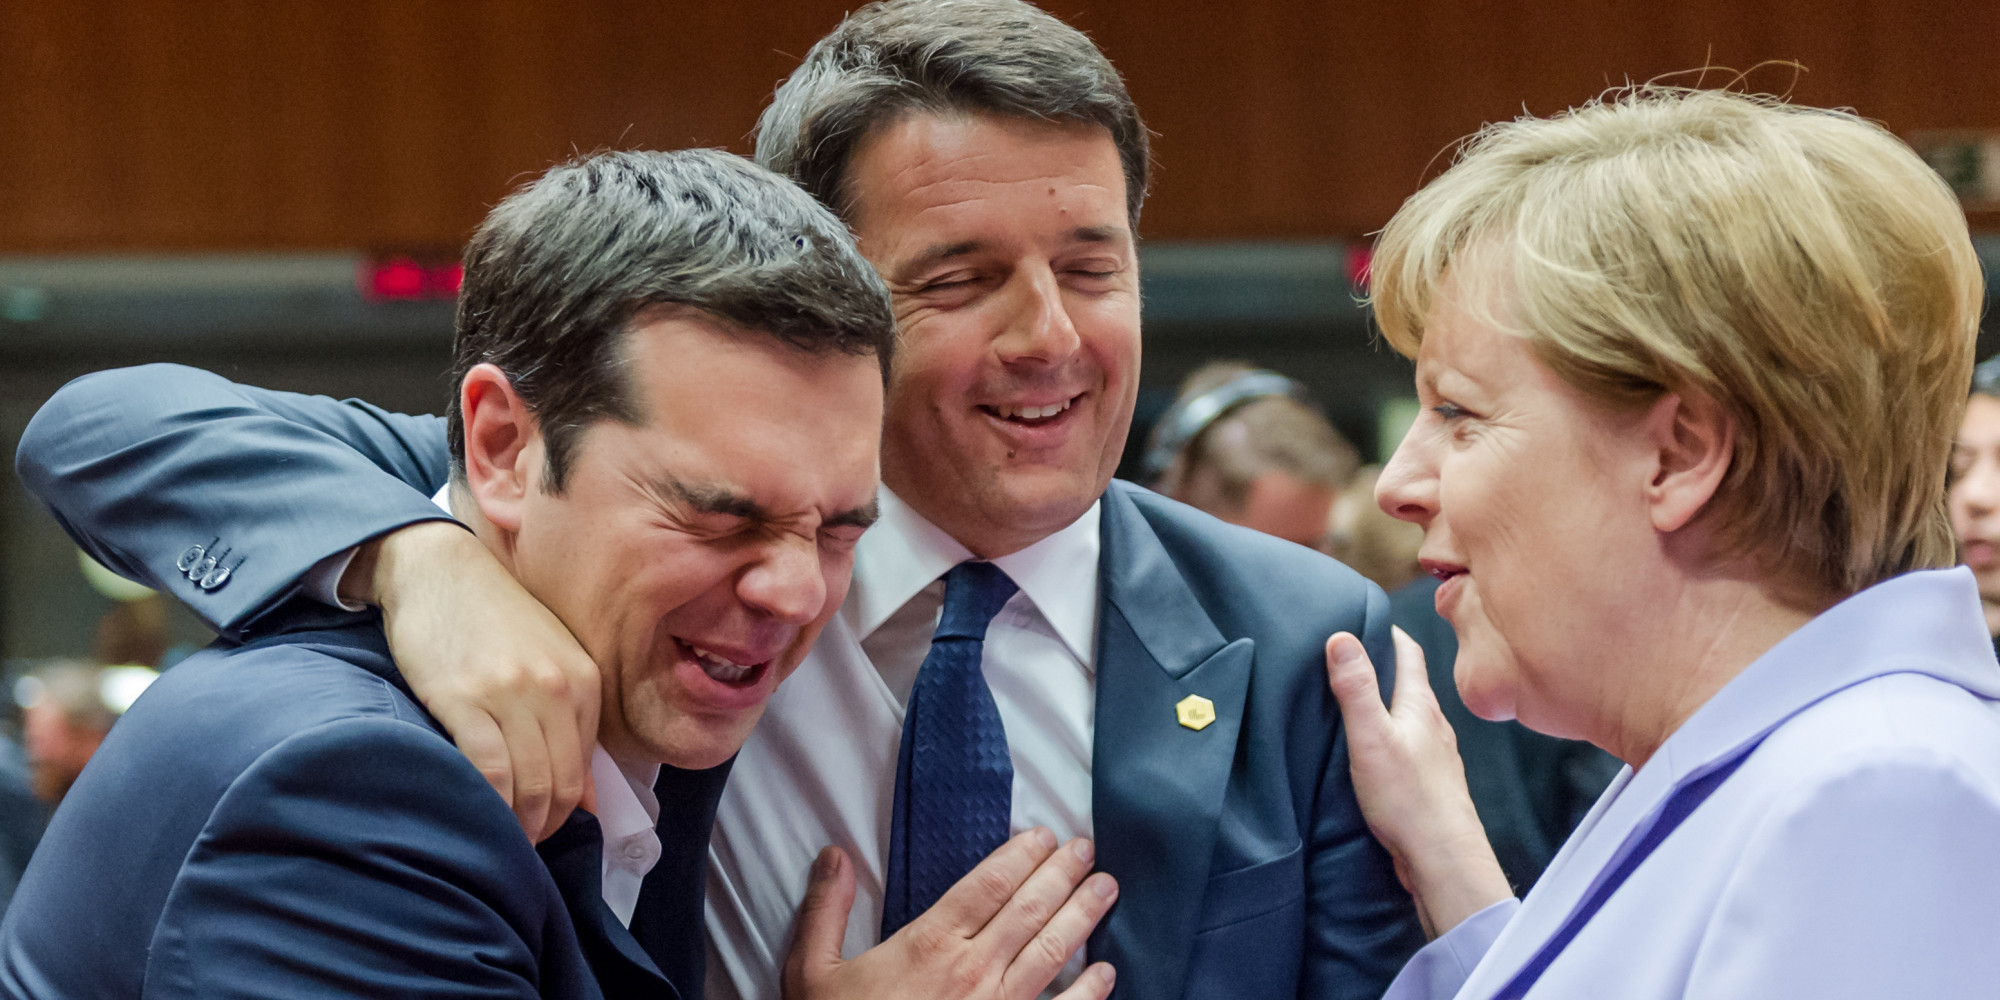 Italian Prime Minister Matteo Renzi, center, speaks with Greek Prime Minister Alexis Tsipras, left, and German Chancellor Angela Merkel during a round table meeting at an EU summit in Brussels on Thursday, June 25, 2015. Greece and its creditors launched a new round of talks in Brussels early Thursday in a fresh bid to unlock billions of euros in loans and save the country from bankruptcy. (AP Photo/Geert Vanden Wijngaert)